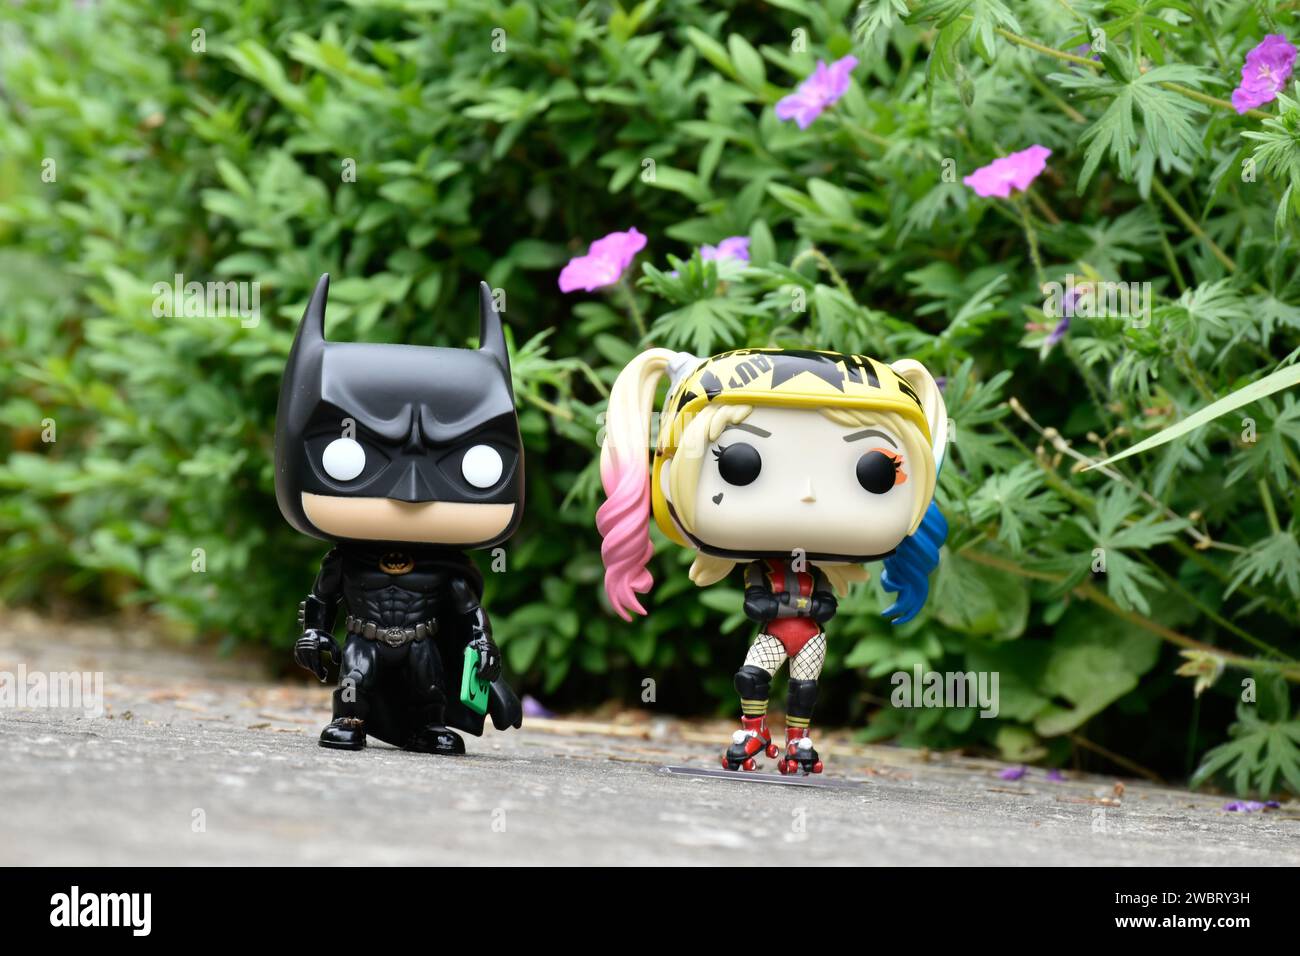 Funko Pop action figures of DC comics superheroes Batman and Harley Quinn standing on asphalt road in spring park, green grass, pink flowers. Stock Photo